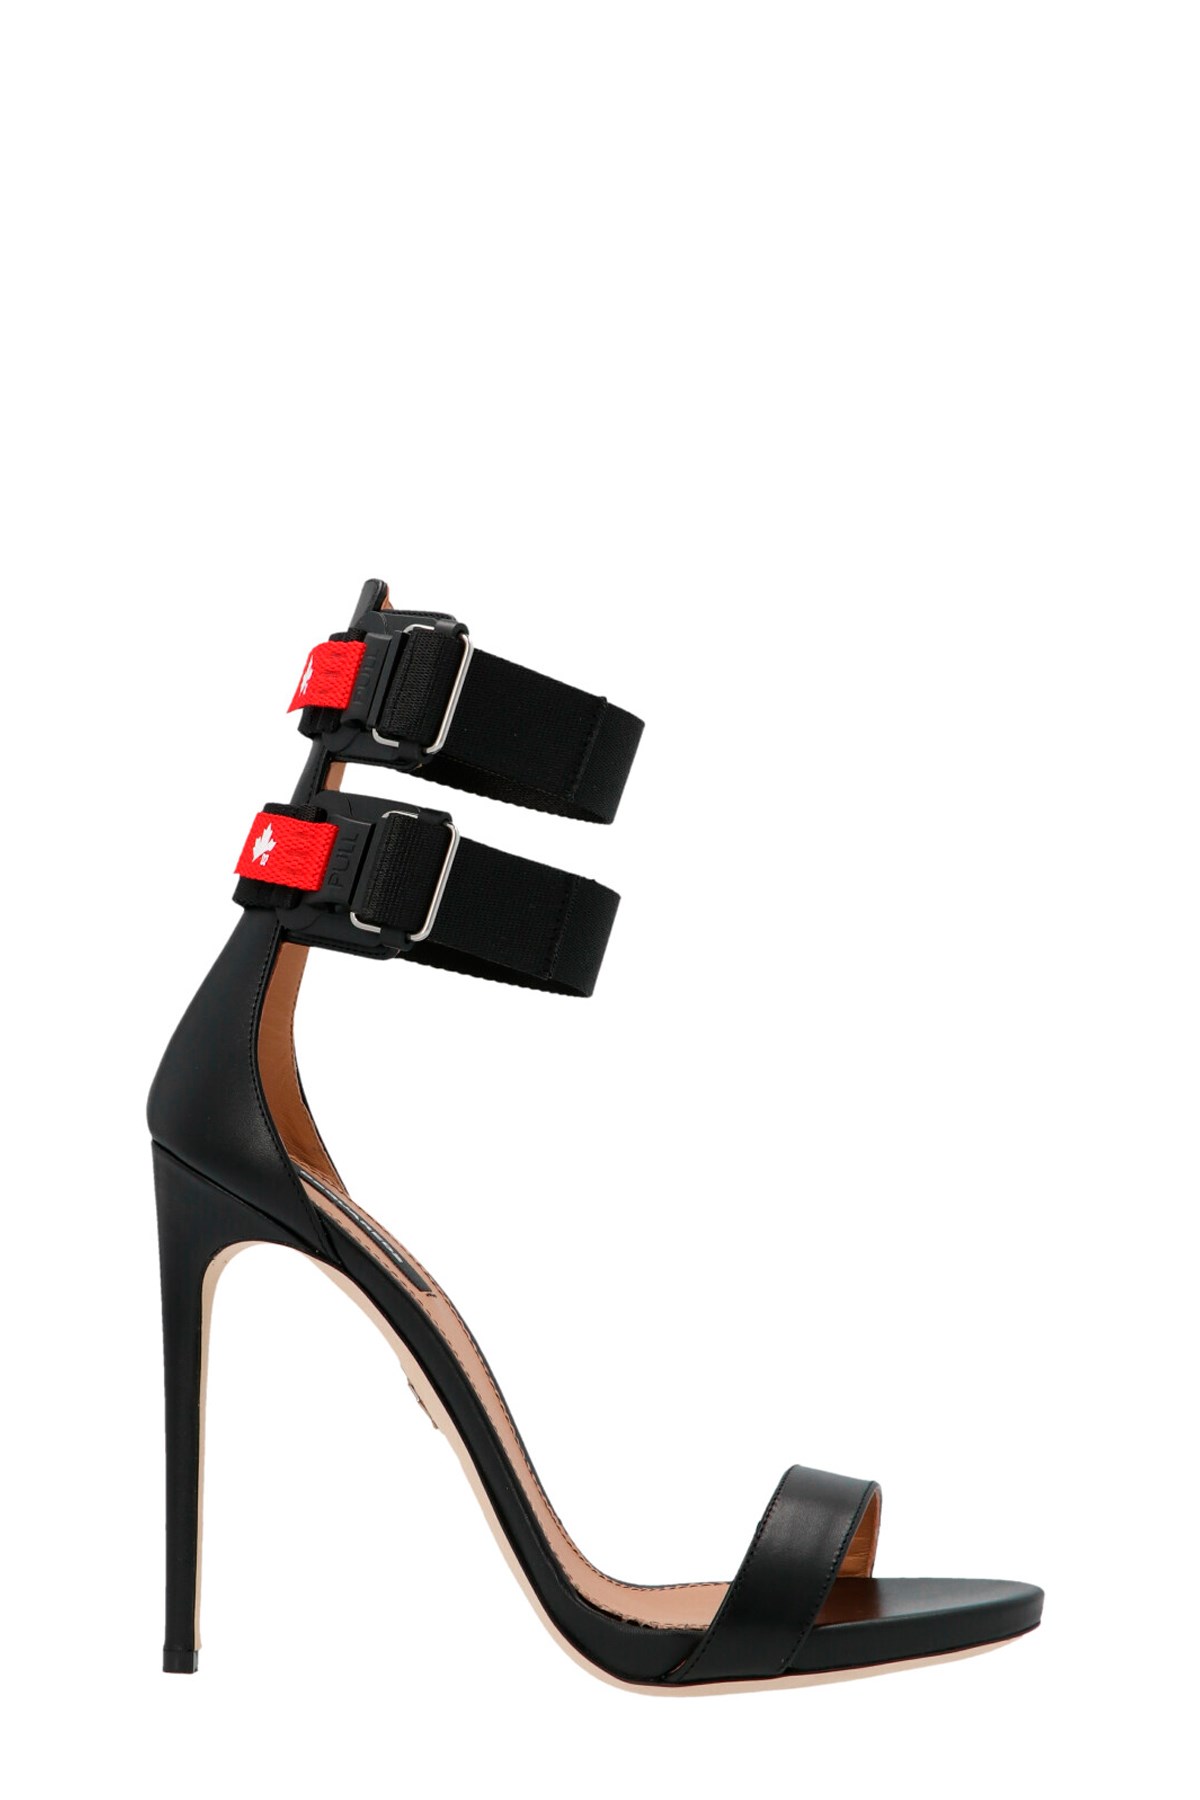 DSQUARED2 Buckles Leather Sandals